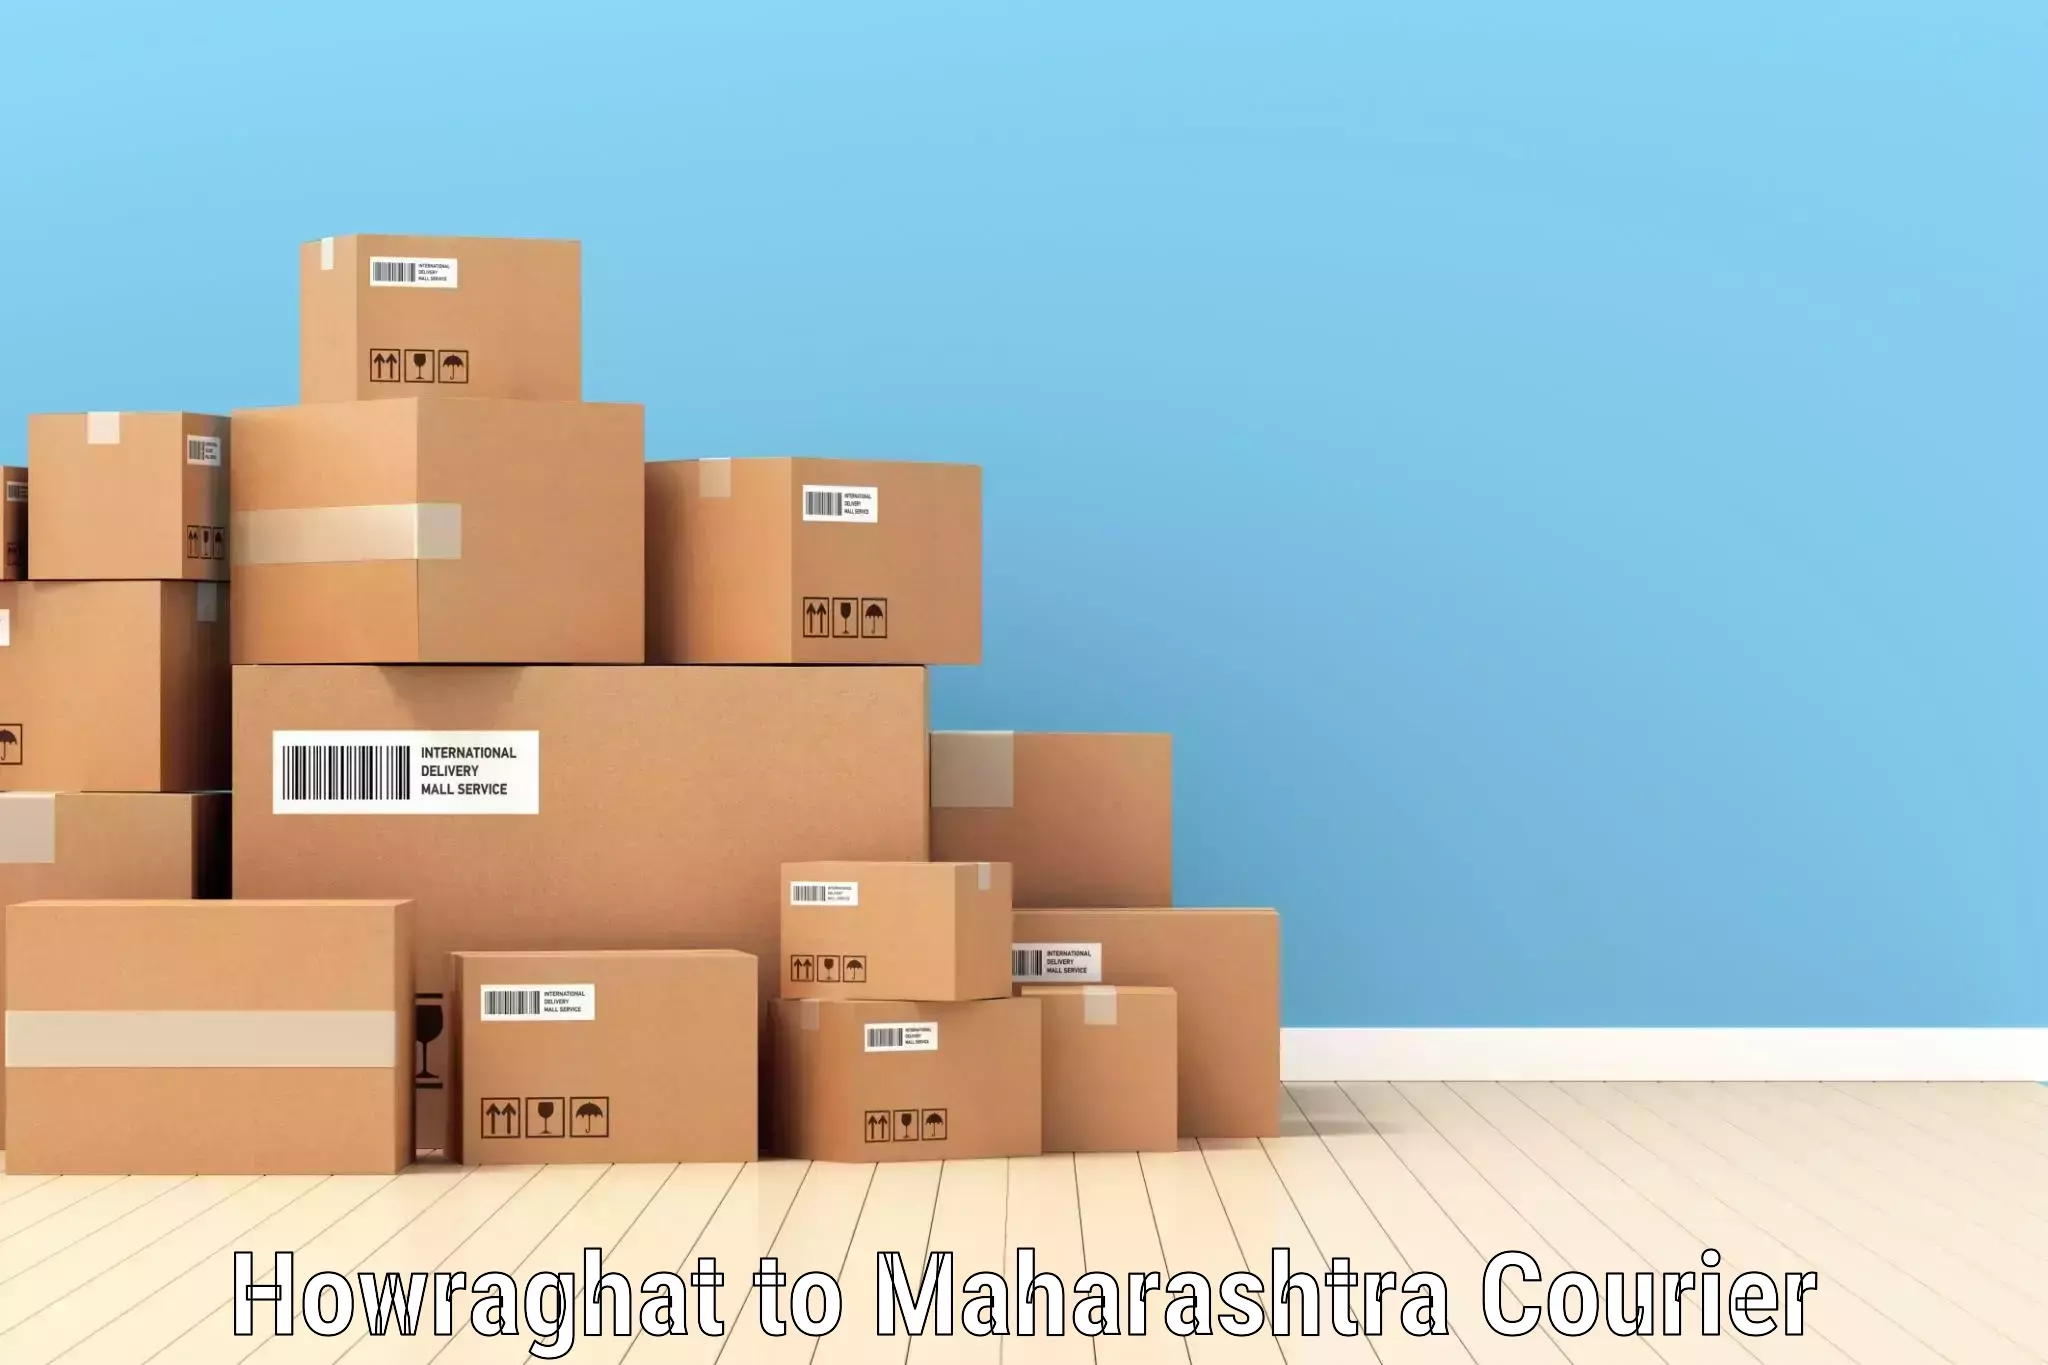 Quality courier partnerships Howraghat to Yavatmal